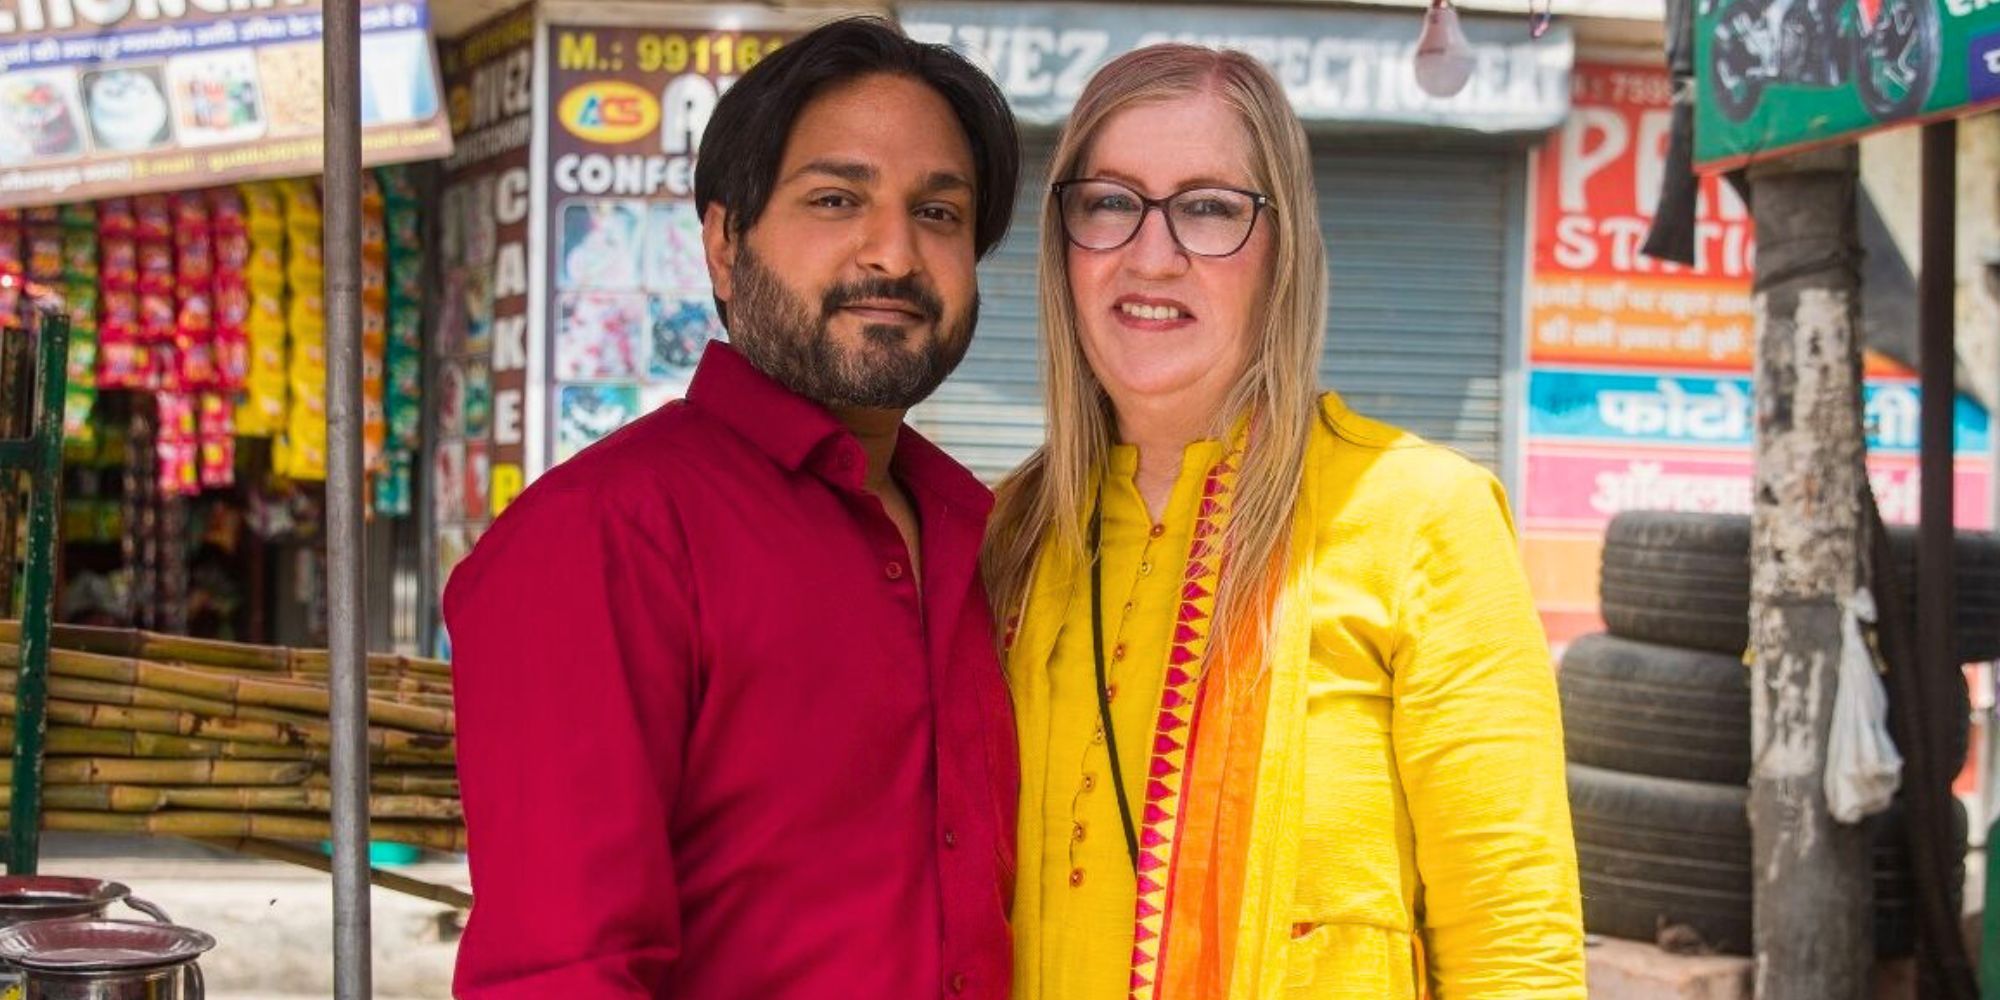 90 Day Fiance's Jenny Slatten and Sumit Singh posing in front of a storefront